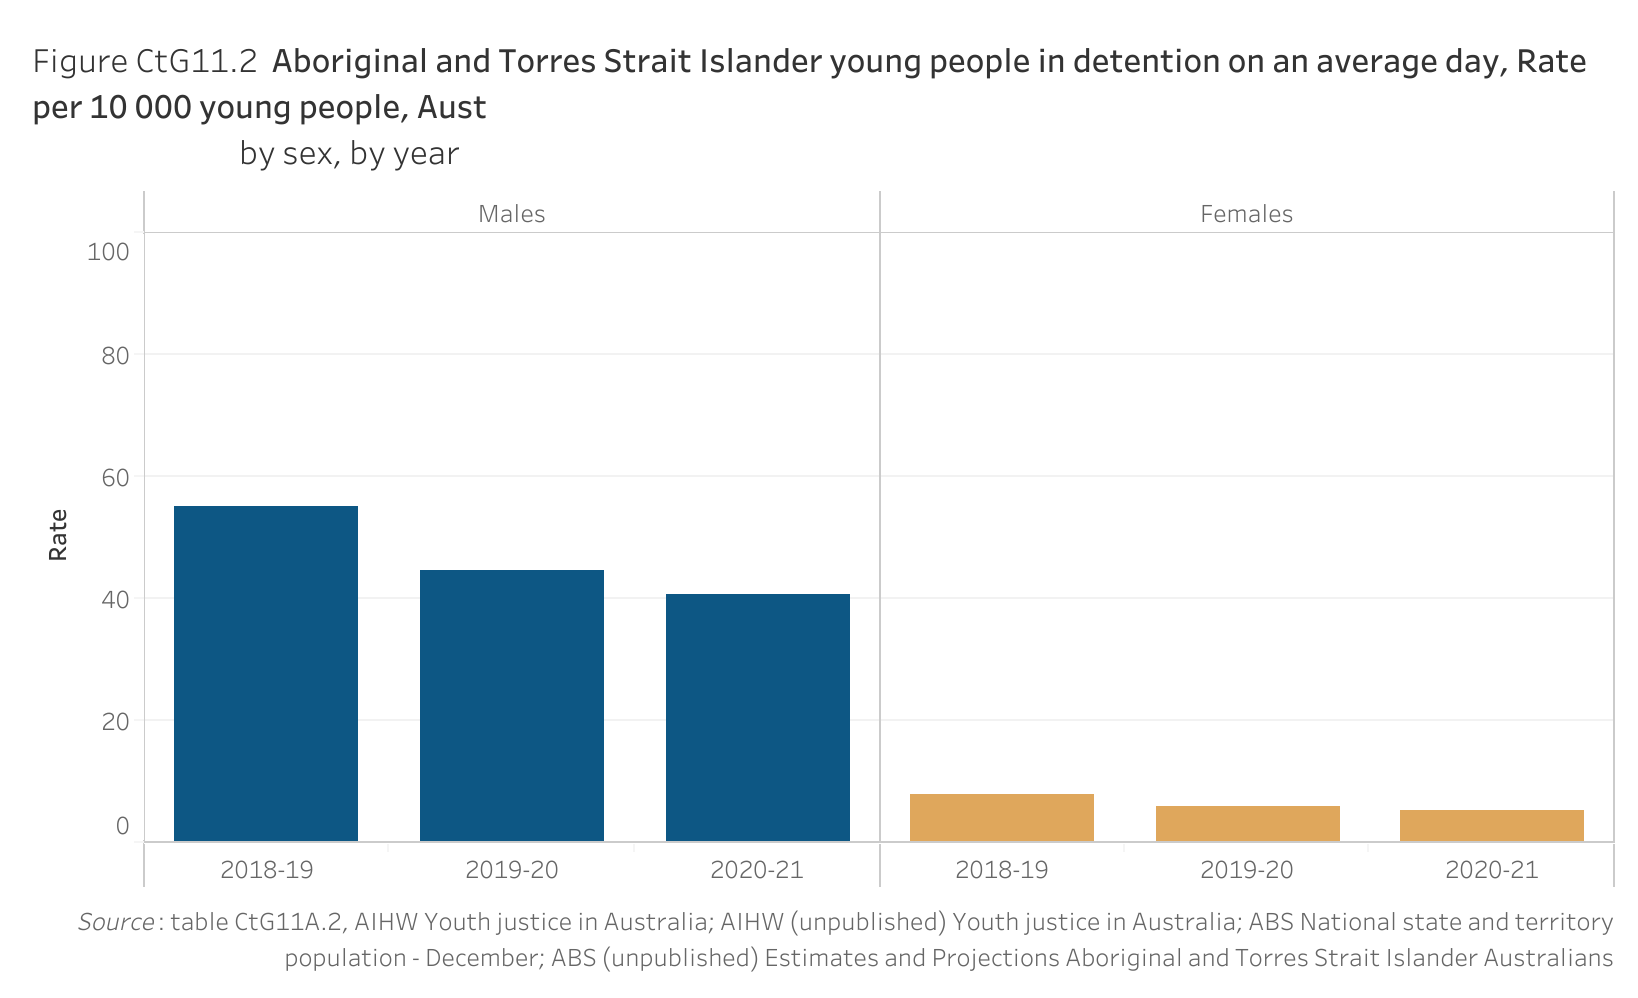 Figure CtG11.2. Bar chart showing the rate of Aboriginal and Torres Strait Islander young people in detention per 10 000 young people on an average day in Australia, by sex and by year. Data table of figure CtG11.2 is below.